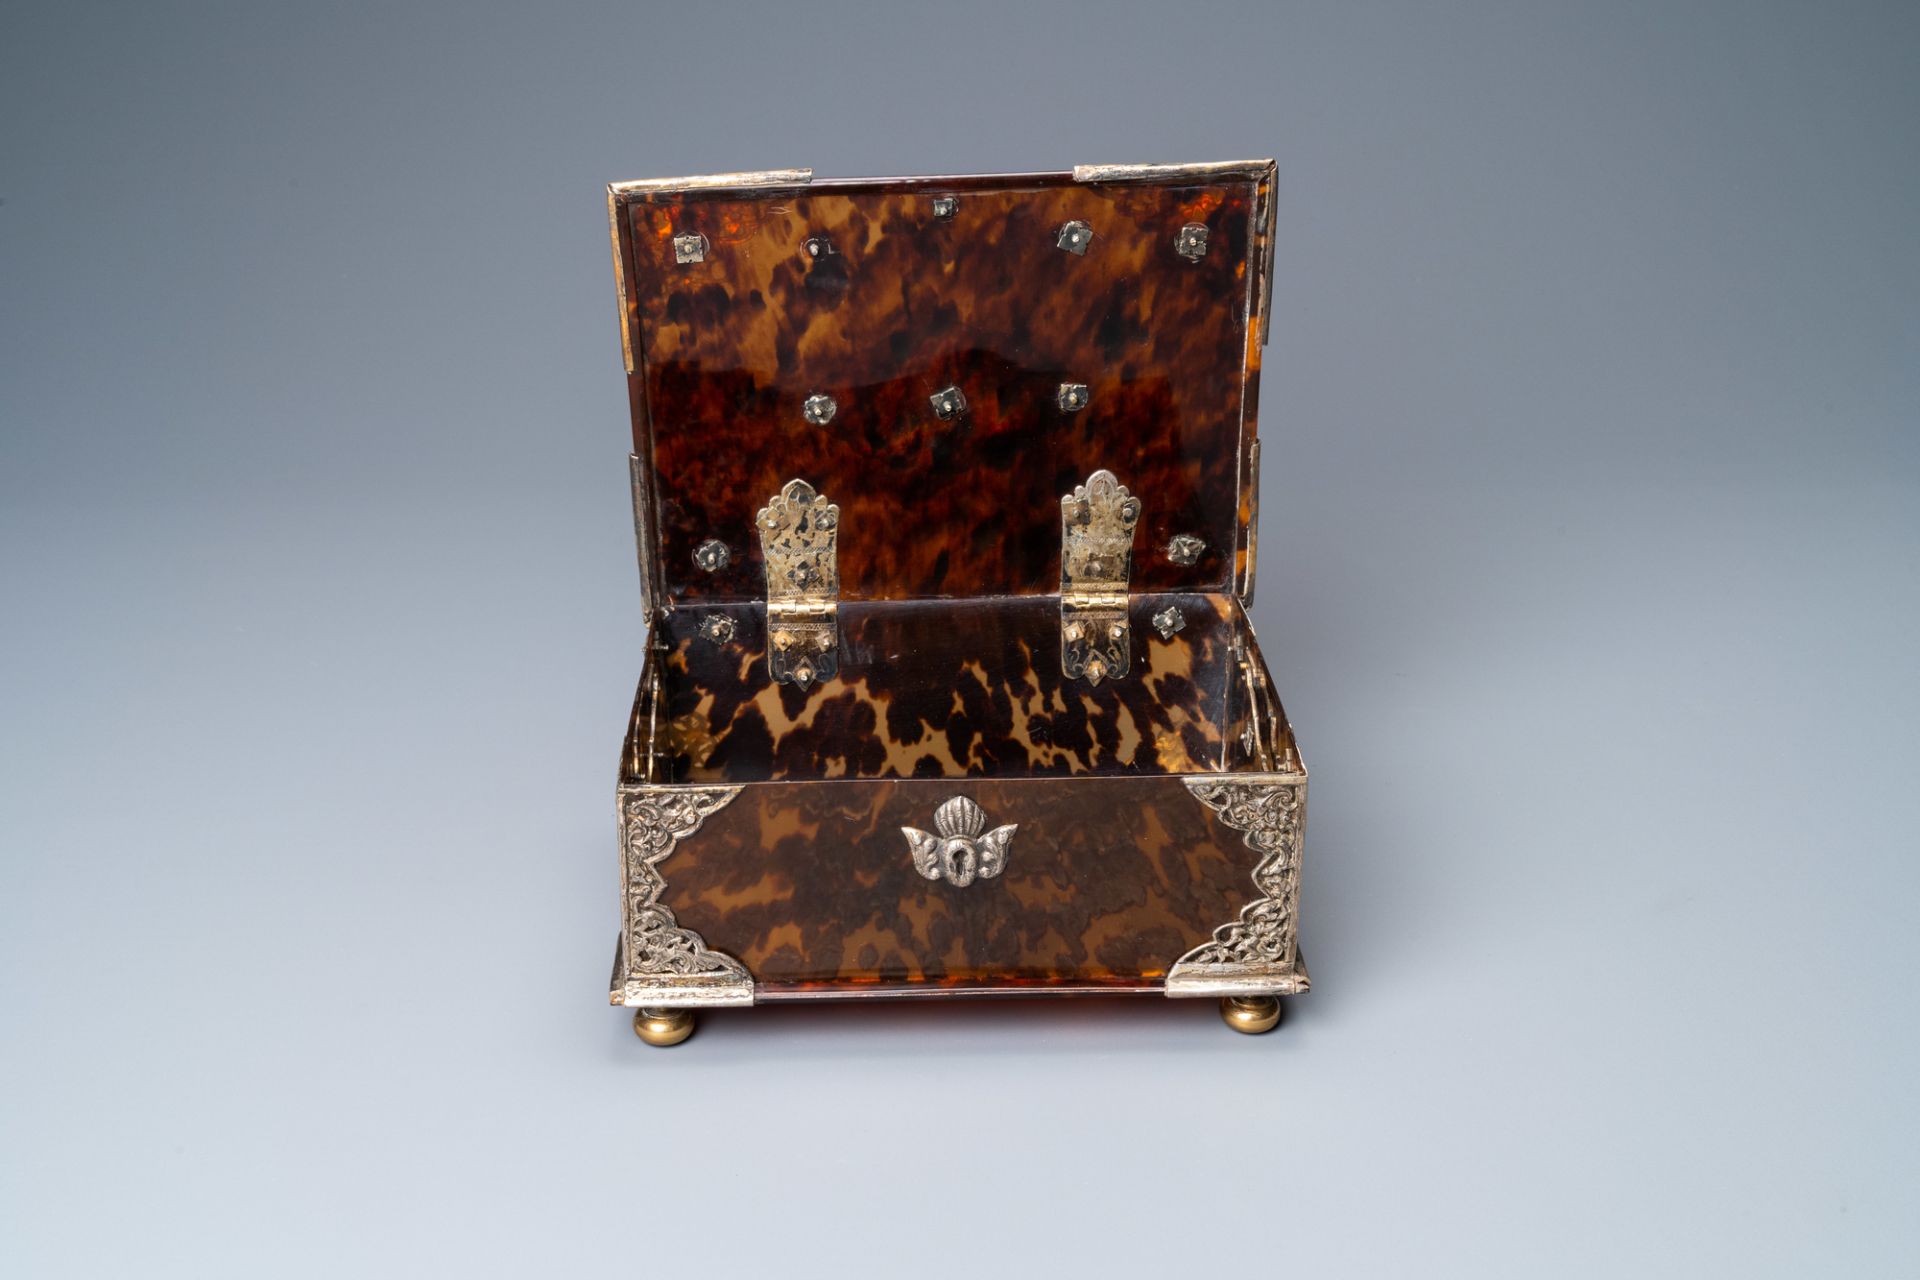 A Dutch colonial silver-mounted tortoise shell sirih casket, ca. 1700 - Image 4 of 10